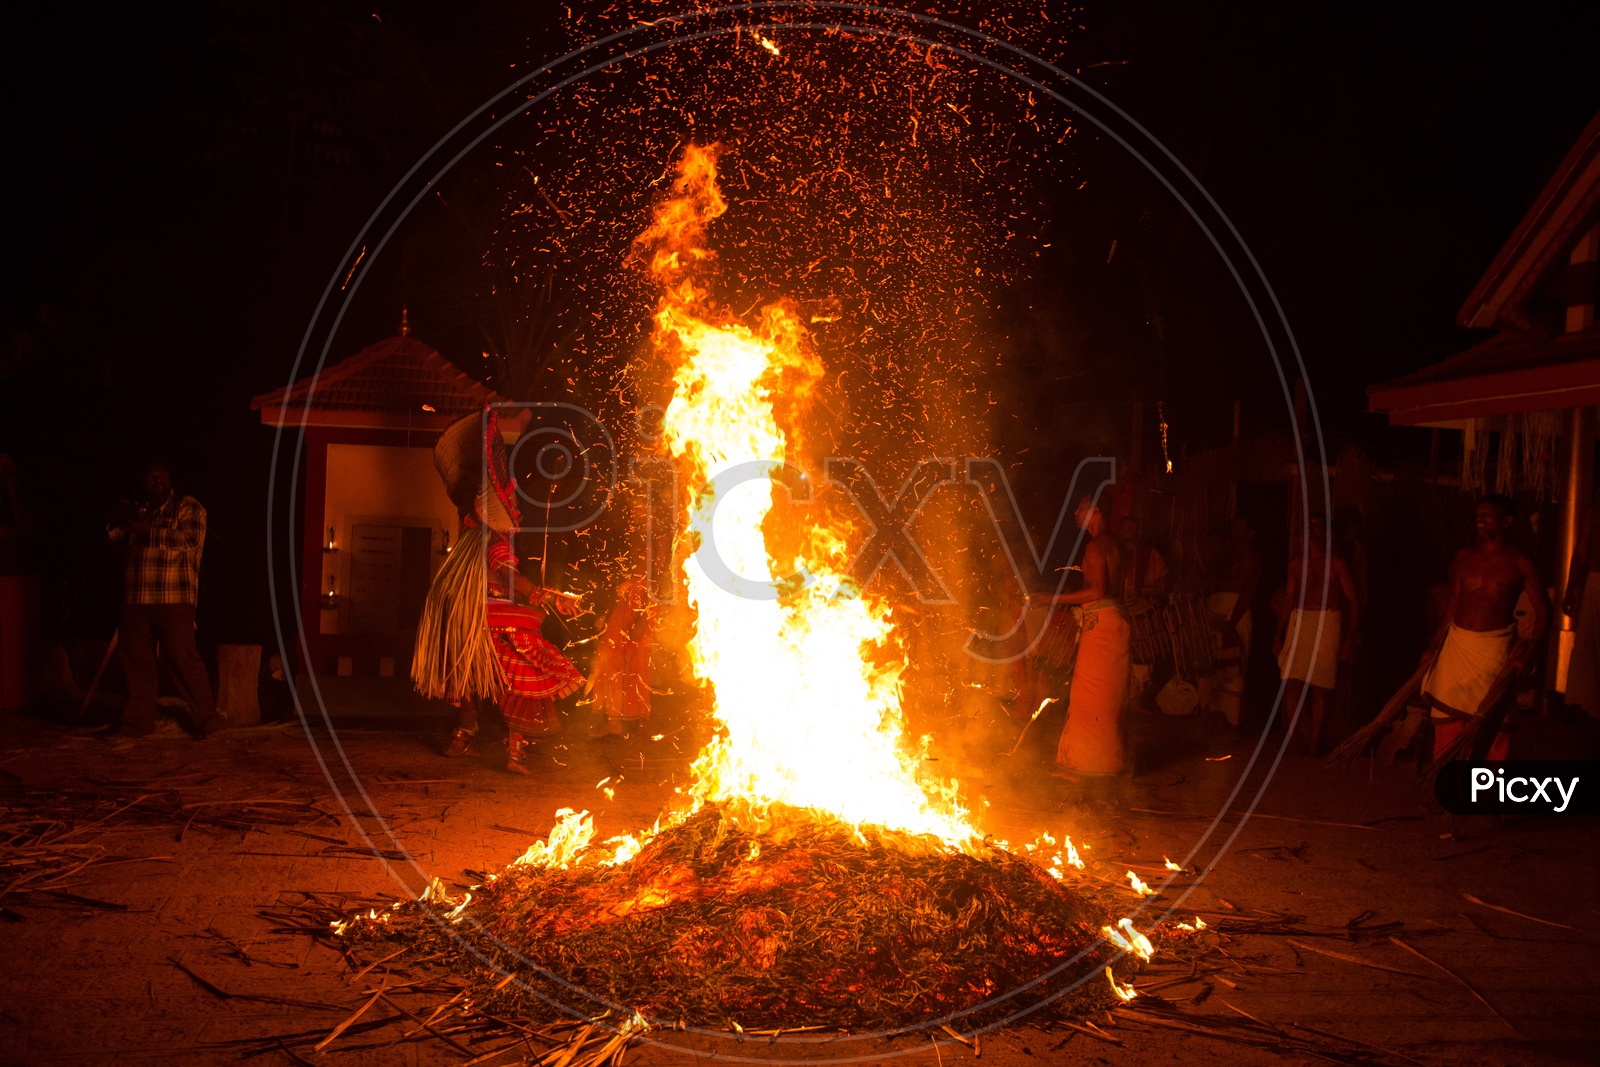 Devotees Making A Camp Fire As A Ritual  At Goddess Bagavathi  Amman Temples During Theyyam Performances